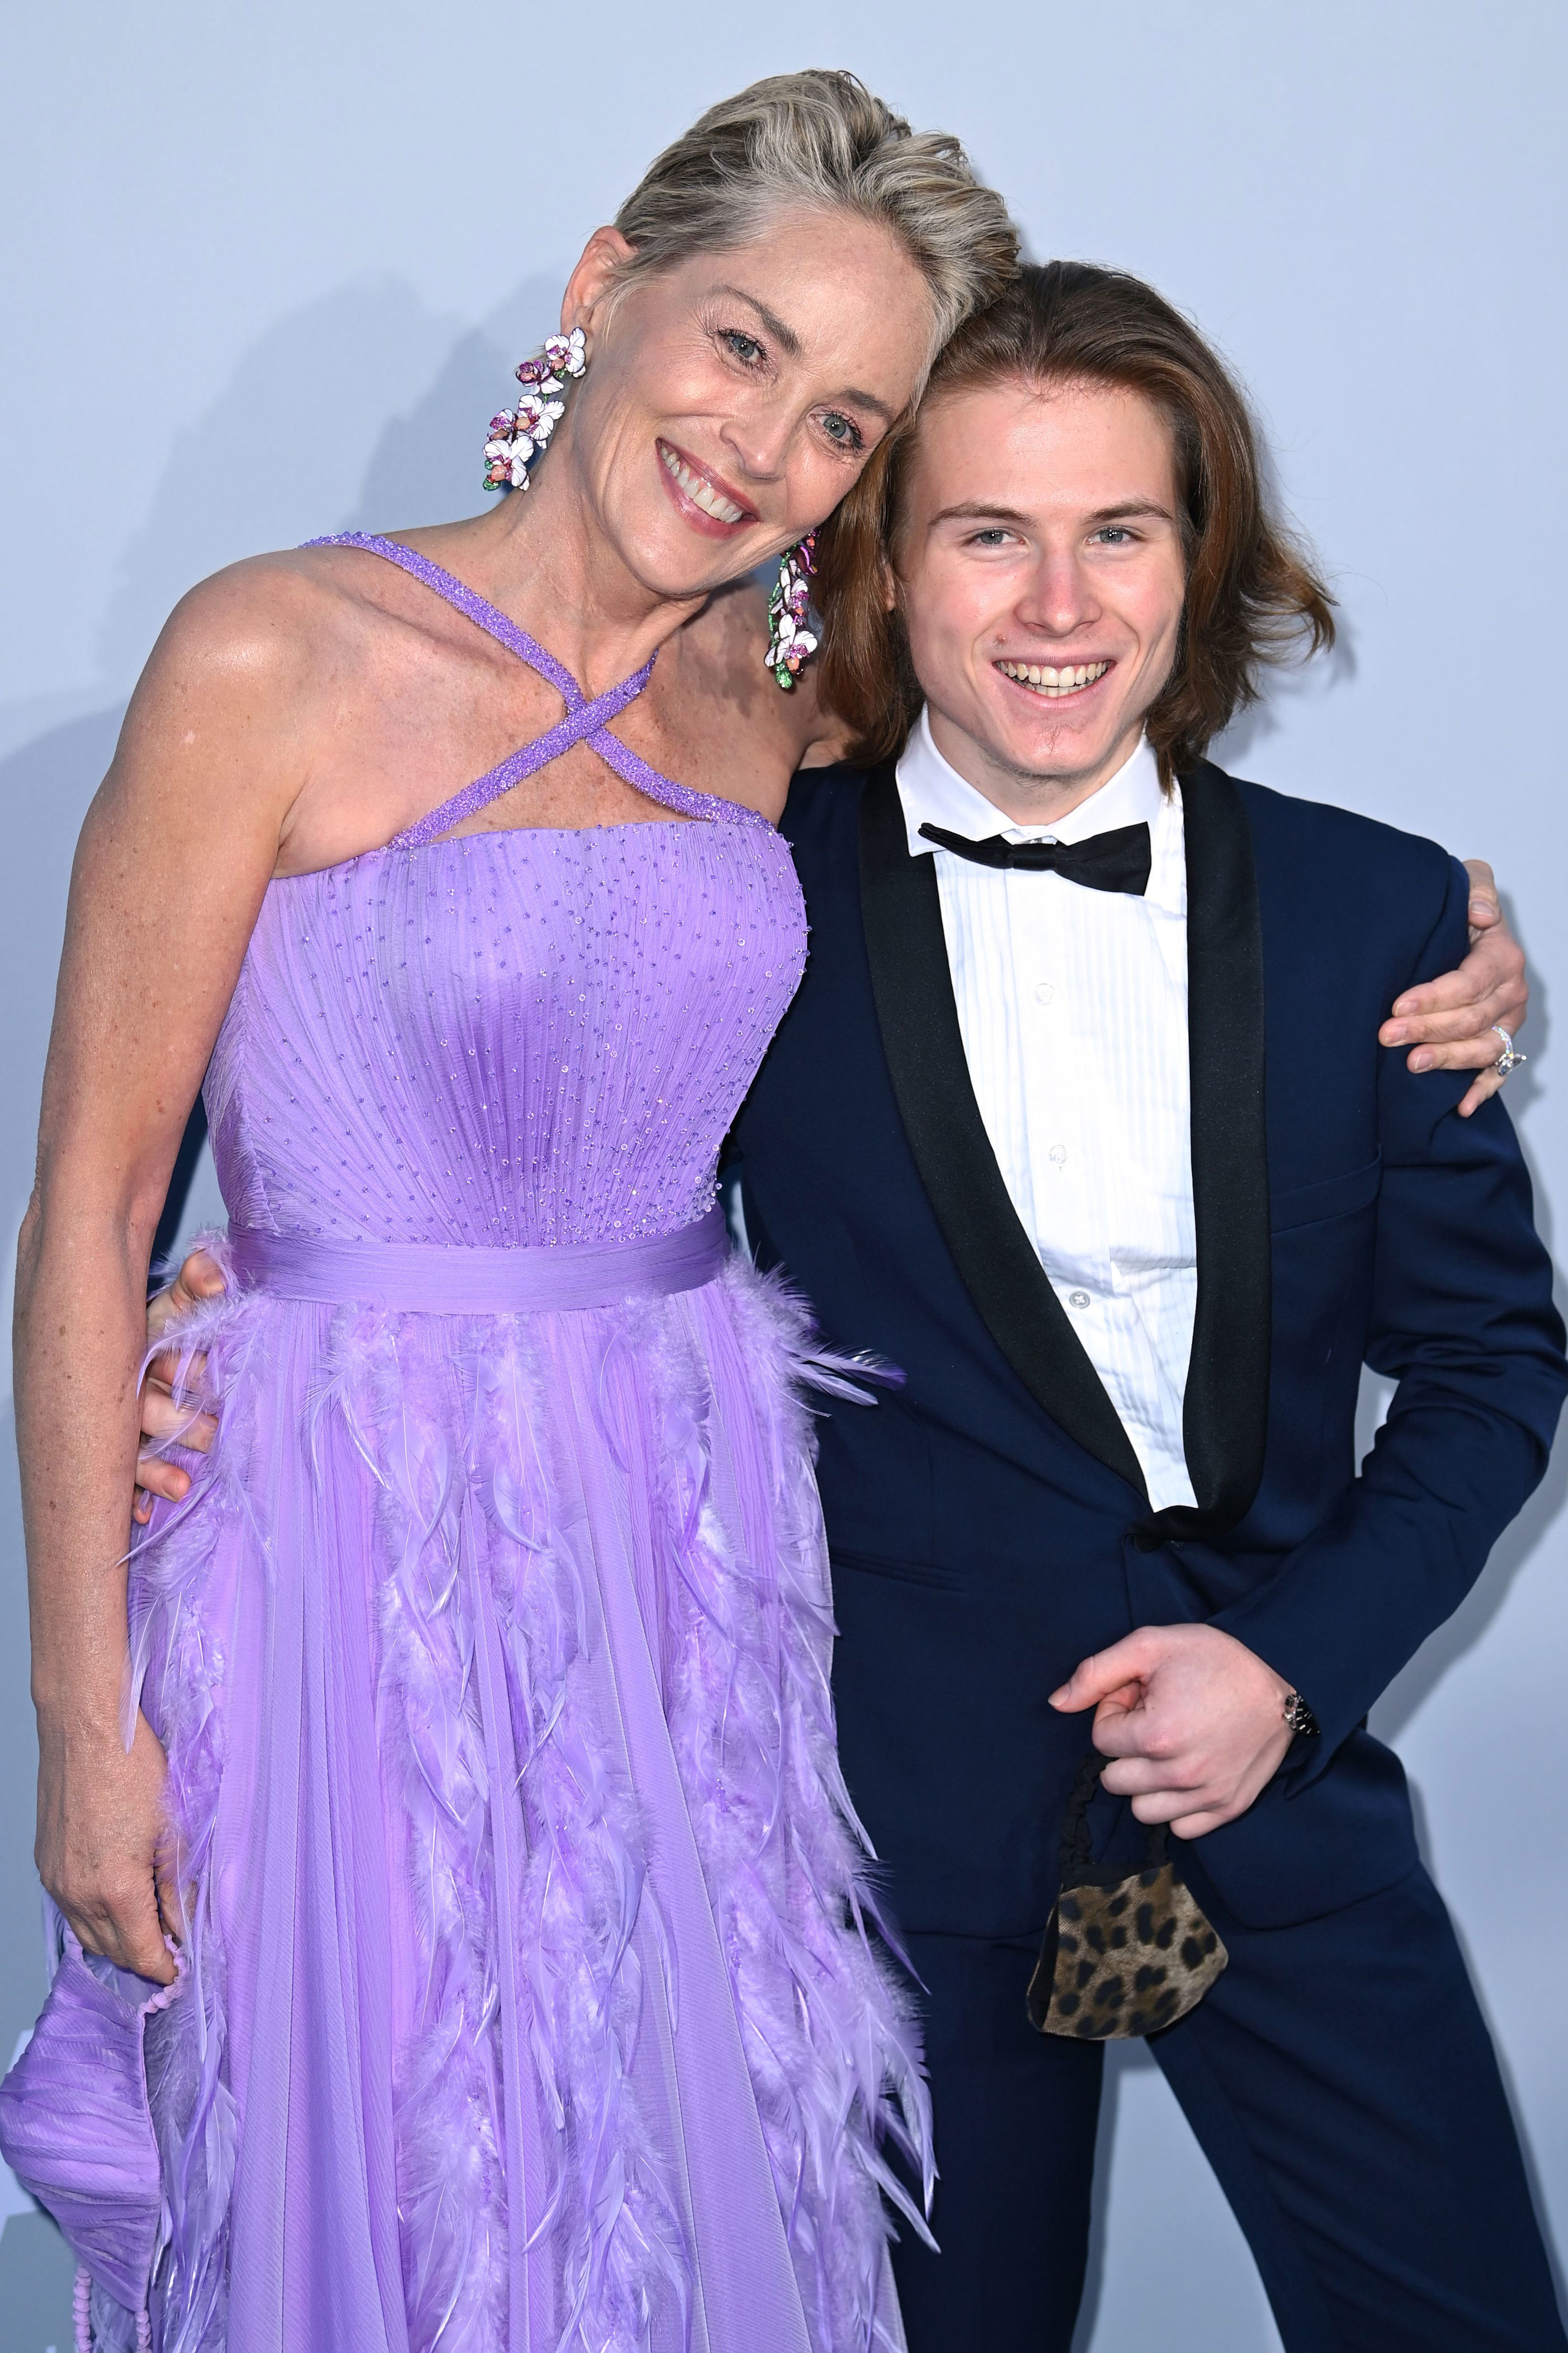 <p>Roan Bronstein, who was born in 2000, joined mom Sharon Stone at the 27th amfAR Gala during the <a href="https://www.wonderwall.com/awards-events/cannes-film-festival-2021-see-all-the-hollywood-stars-in-france-473038.gallery">Cannes Film Festival</a> in July 2021. Sharon is also a mom to two younger sons, Laird (whom she adopted in 2005), and Quinn (whom she adopted in 2006).</p>